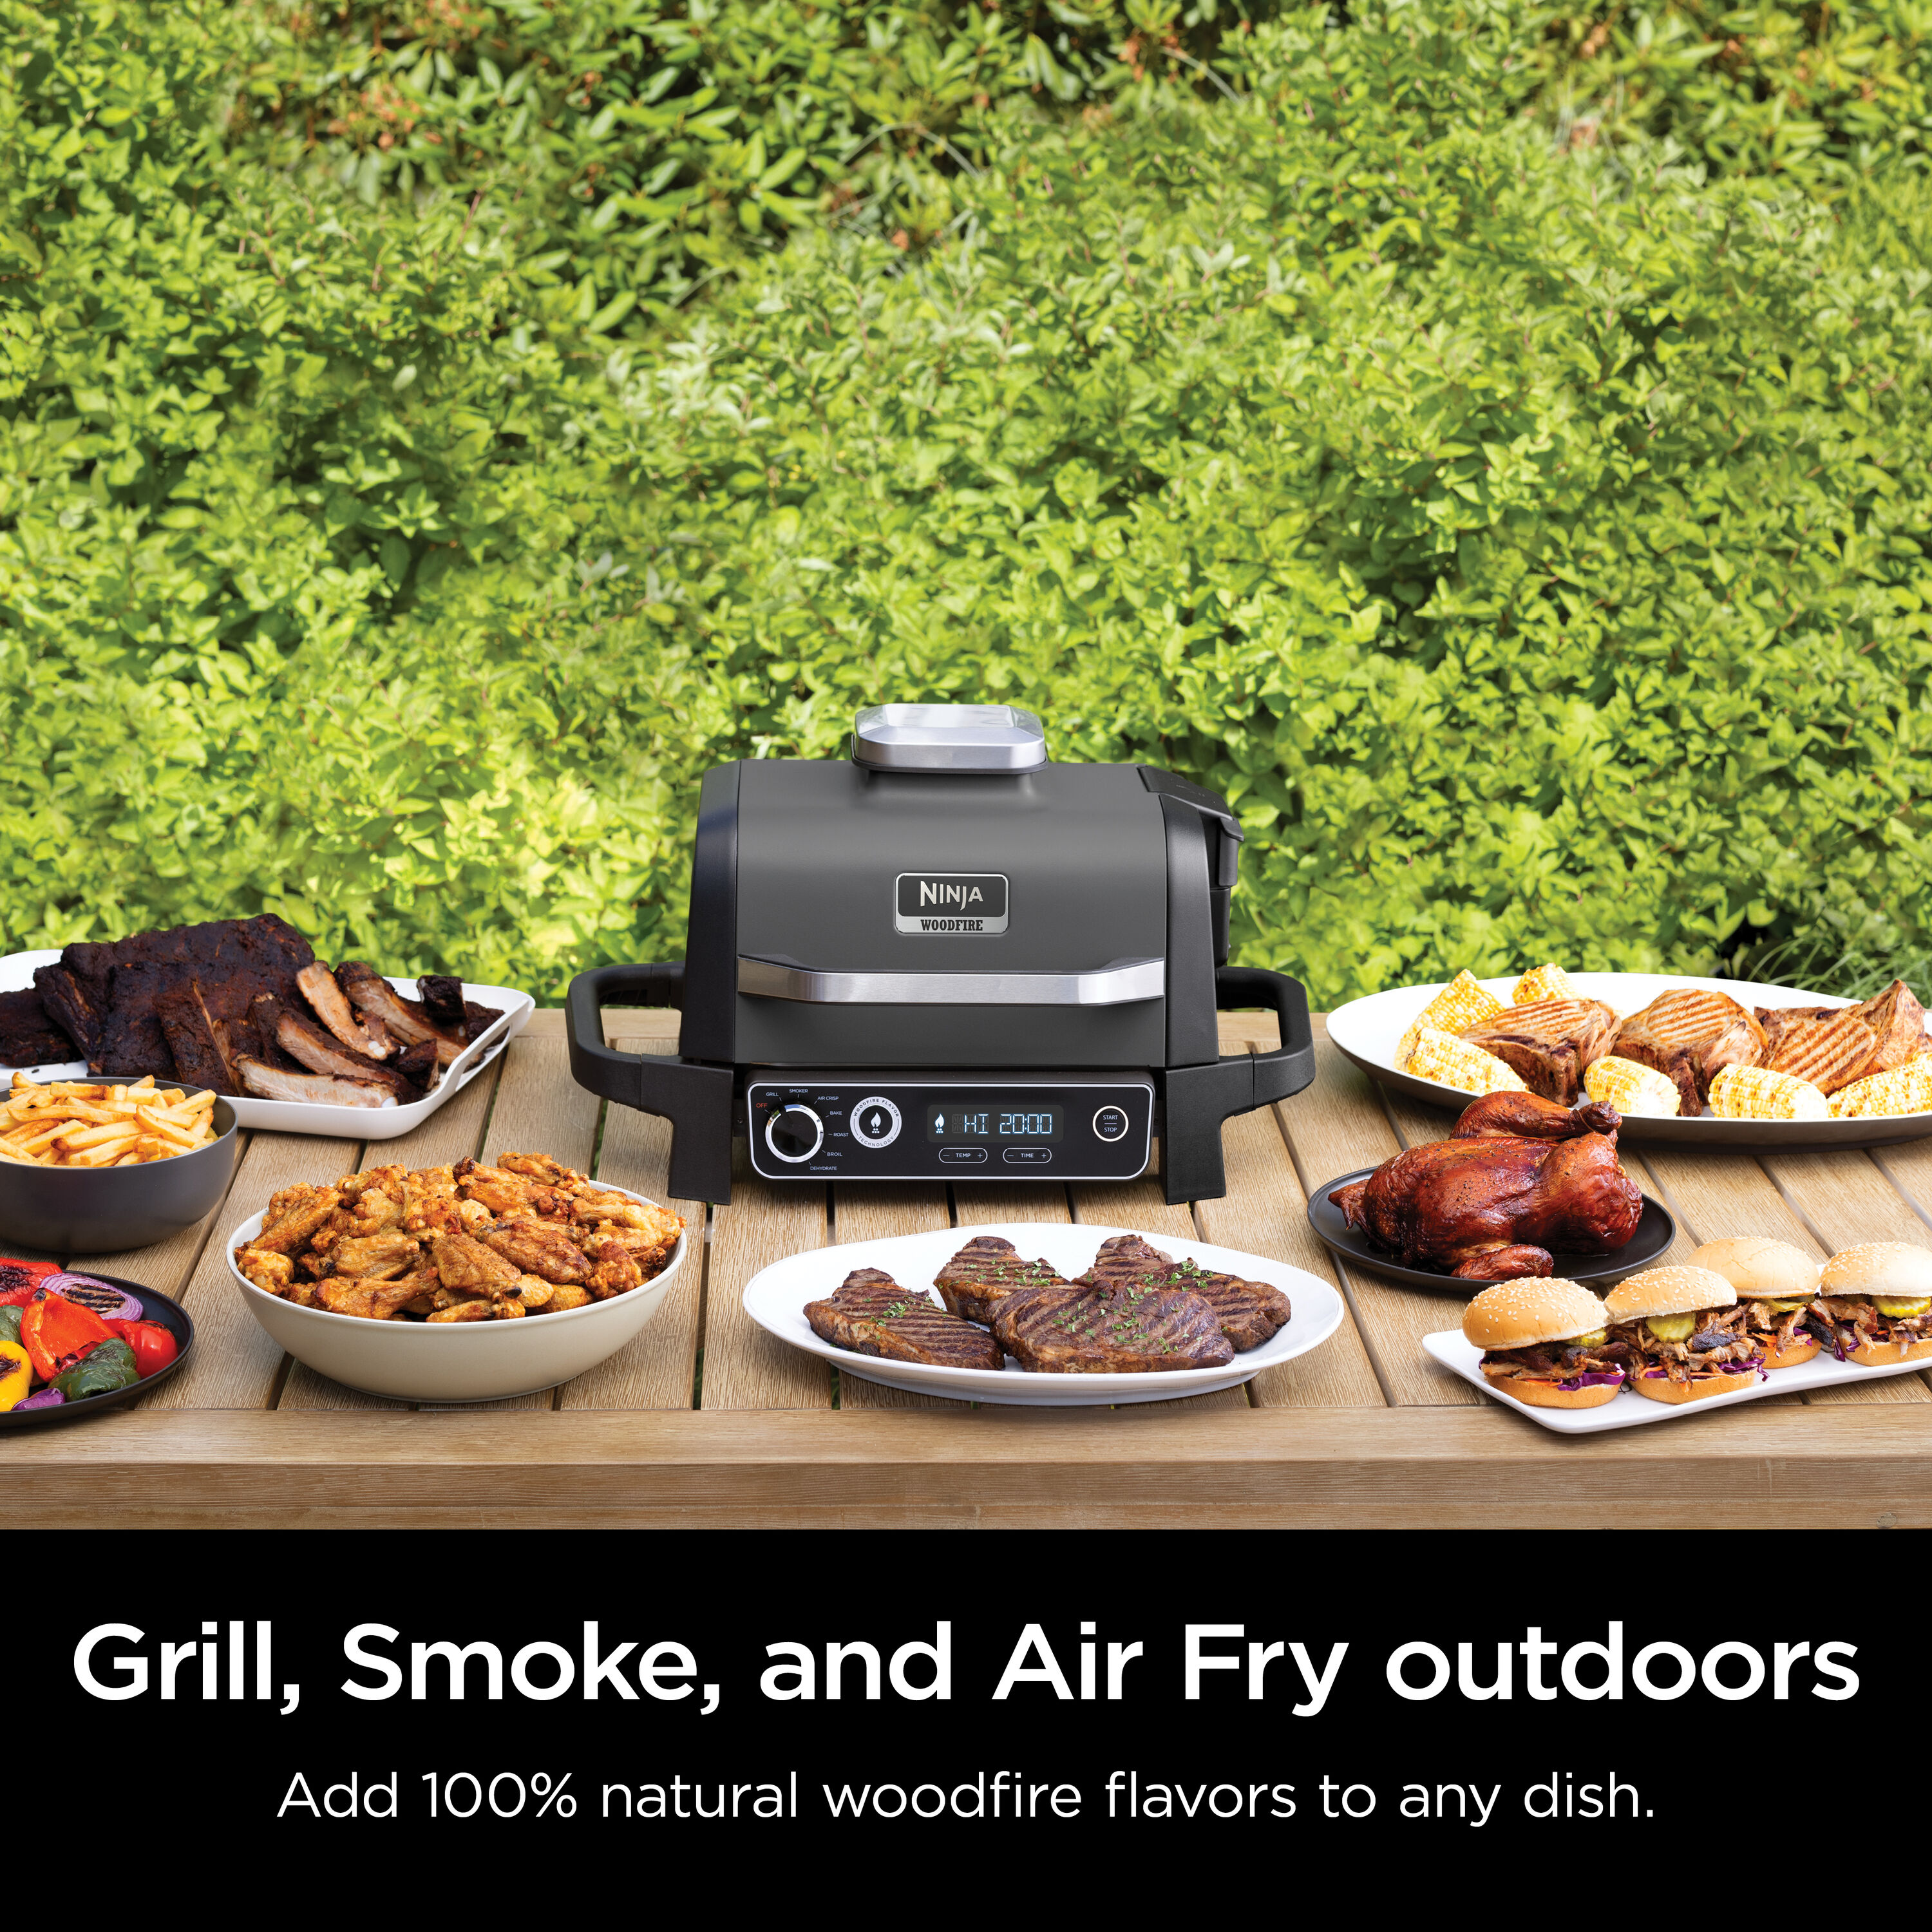 Ninja Woodfire 7-in-1 Outdoor Grill and Smoker 1760-Watt Grey Electric Grill